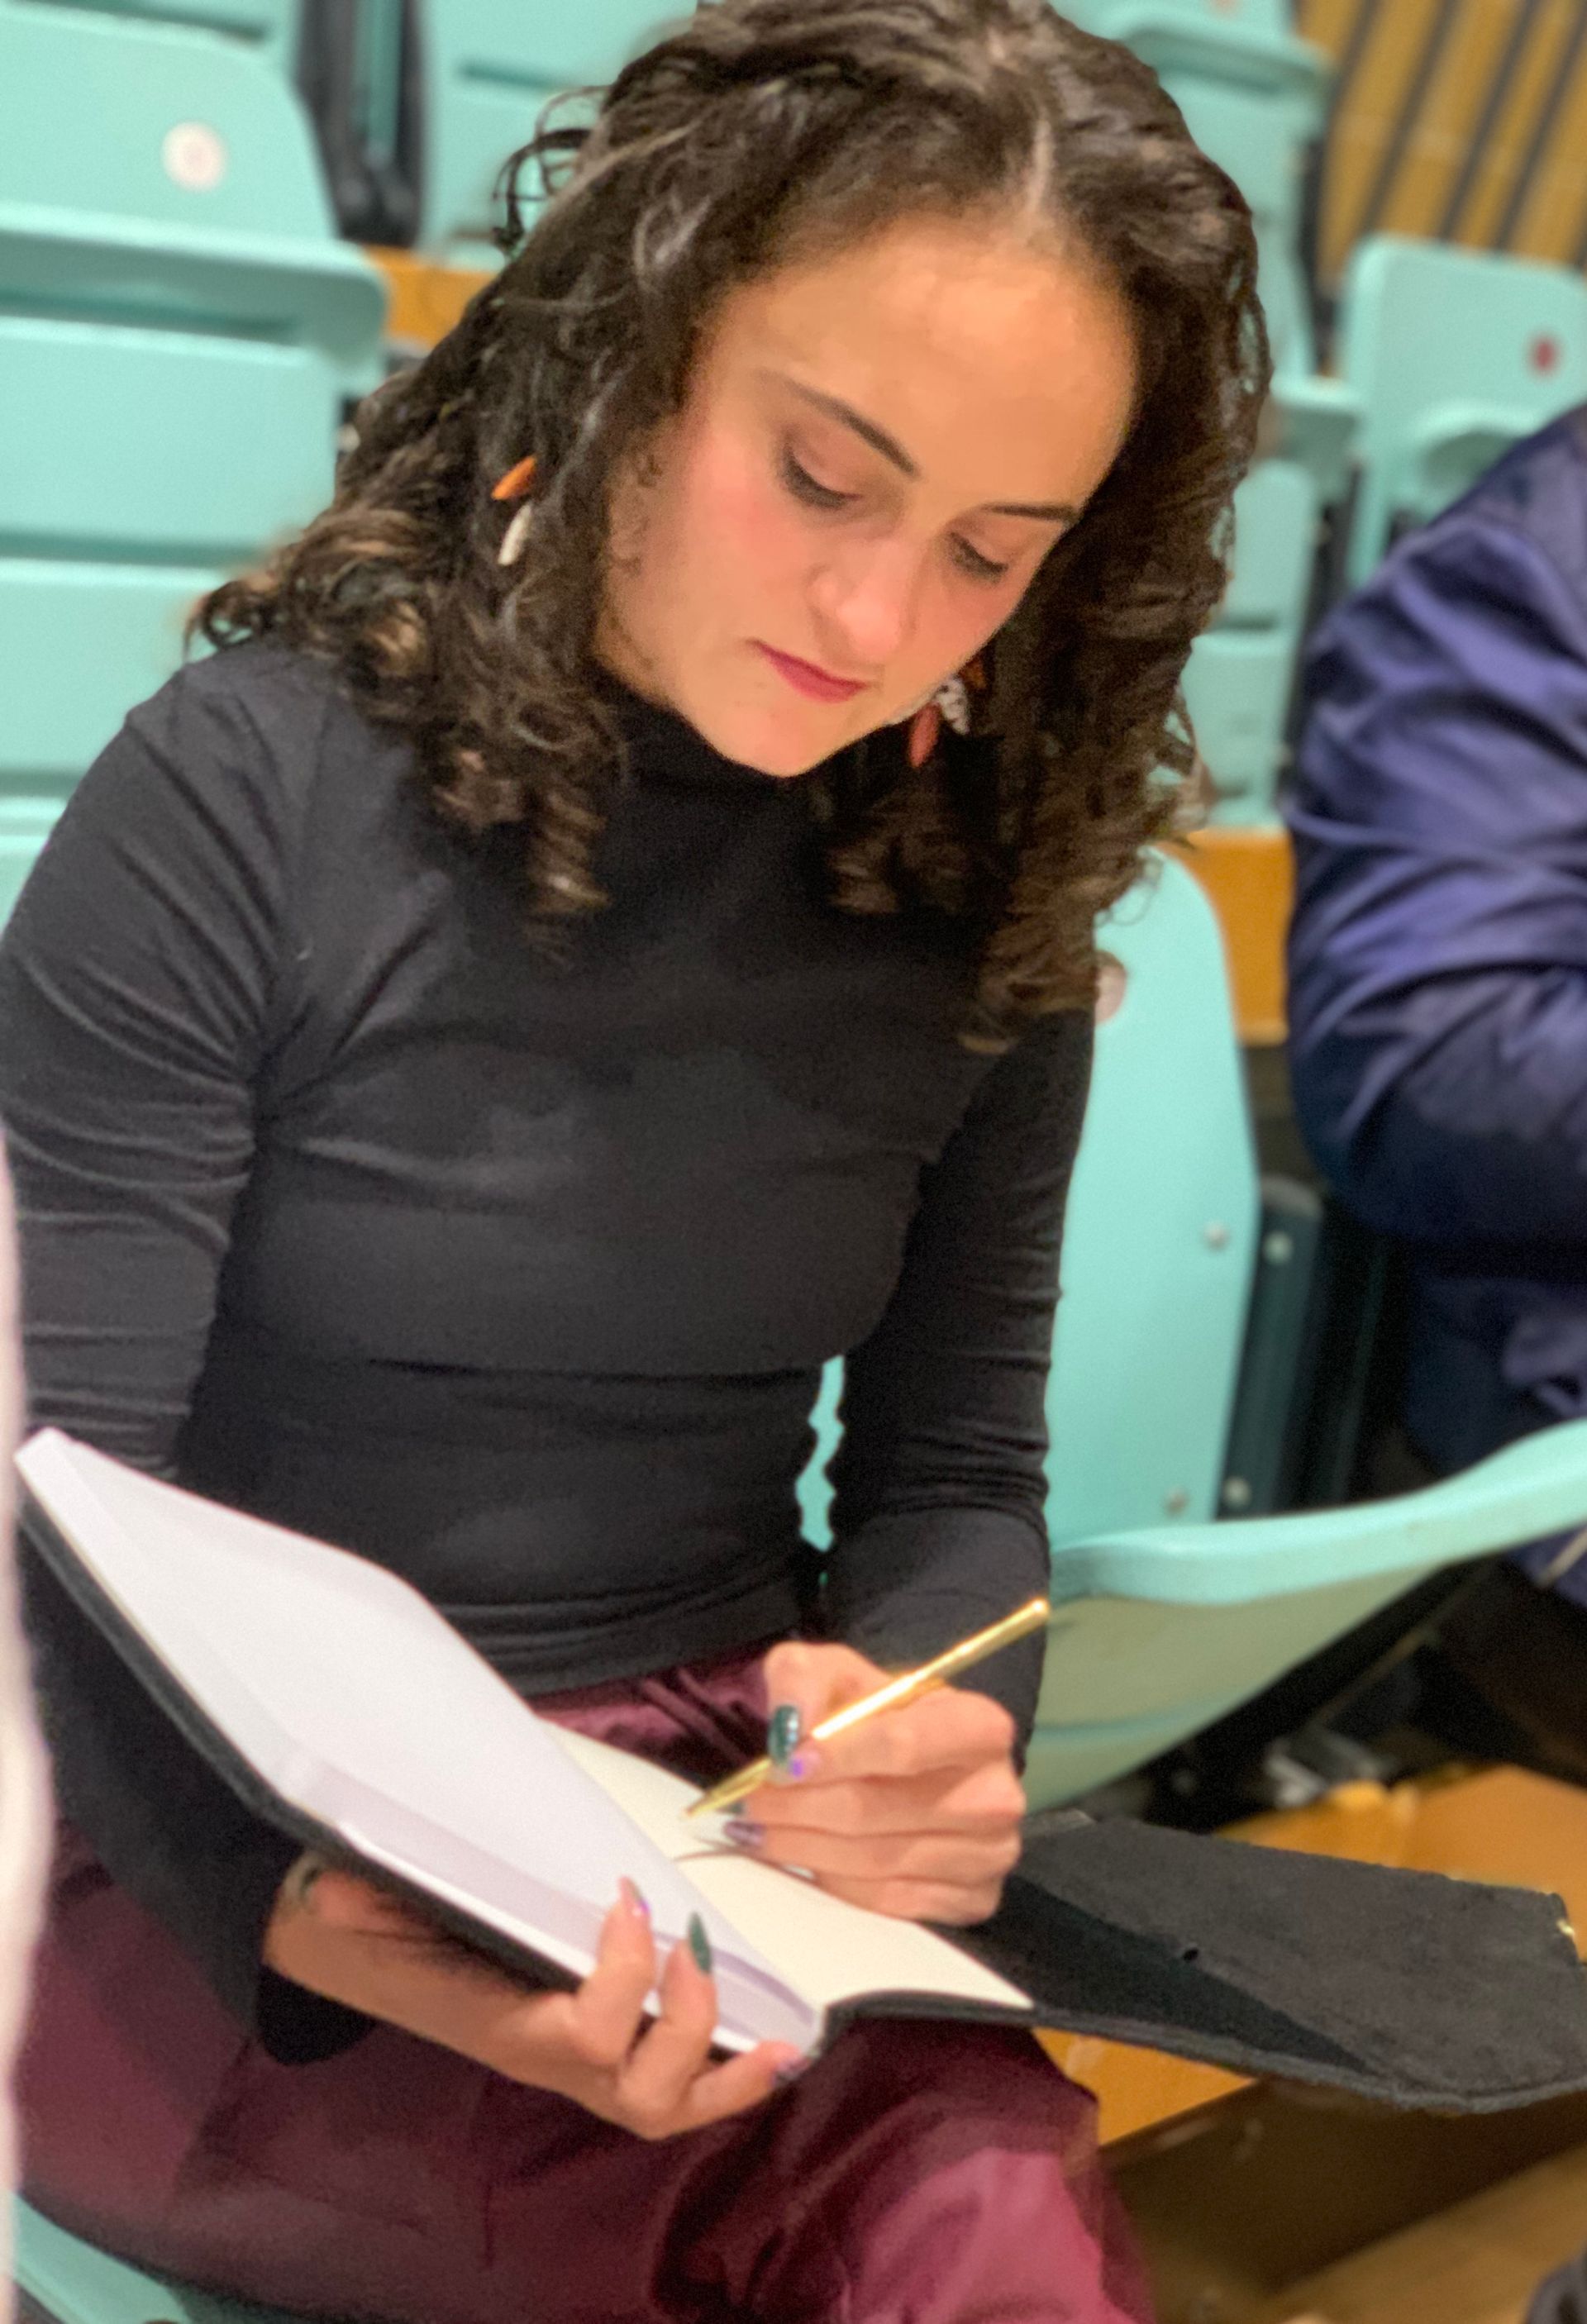 Lauren Lethbridge with long brown curly hair, in a black top with a note book open on her lap, holding a gold pen and writing notes. She is sitting on pastel green chair. 